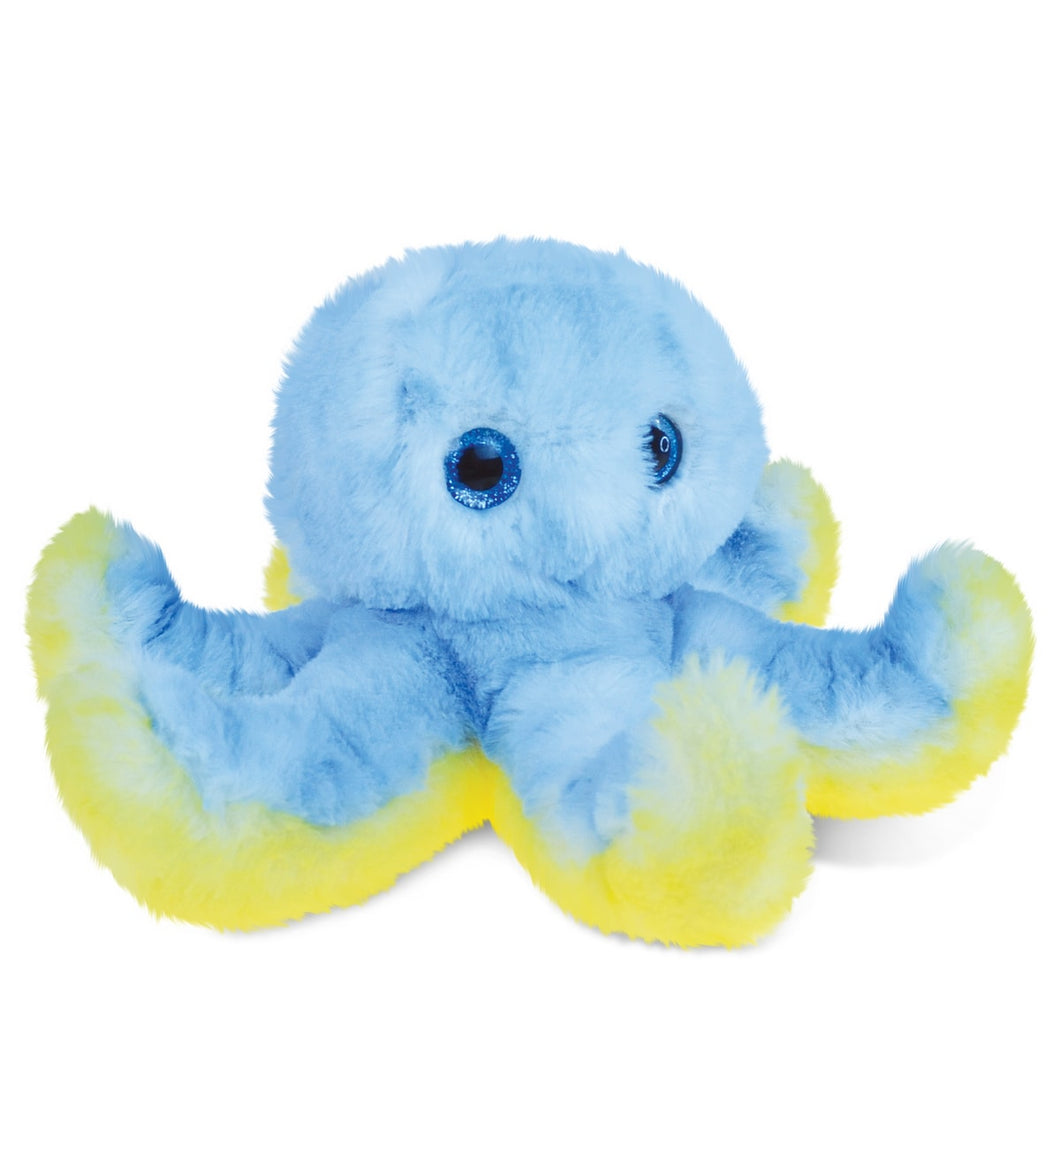 COTA blue octopus stuffed animal plush toy with Butterfly Pavilion logo on stomach.